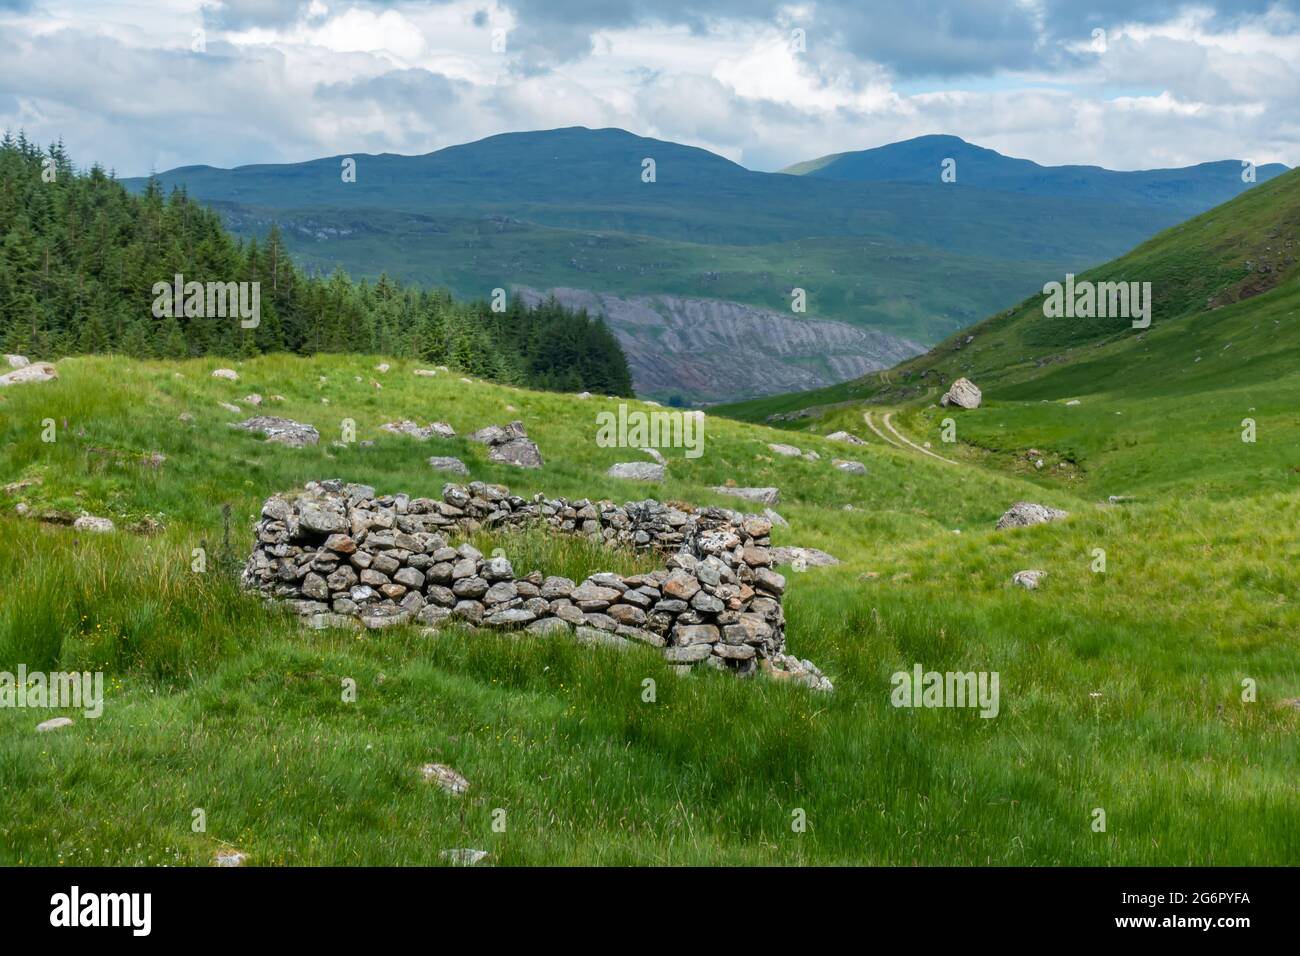 Ruin of an old stone building in the Scottish Highlands near Crianlarich Stock Photo